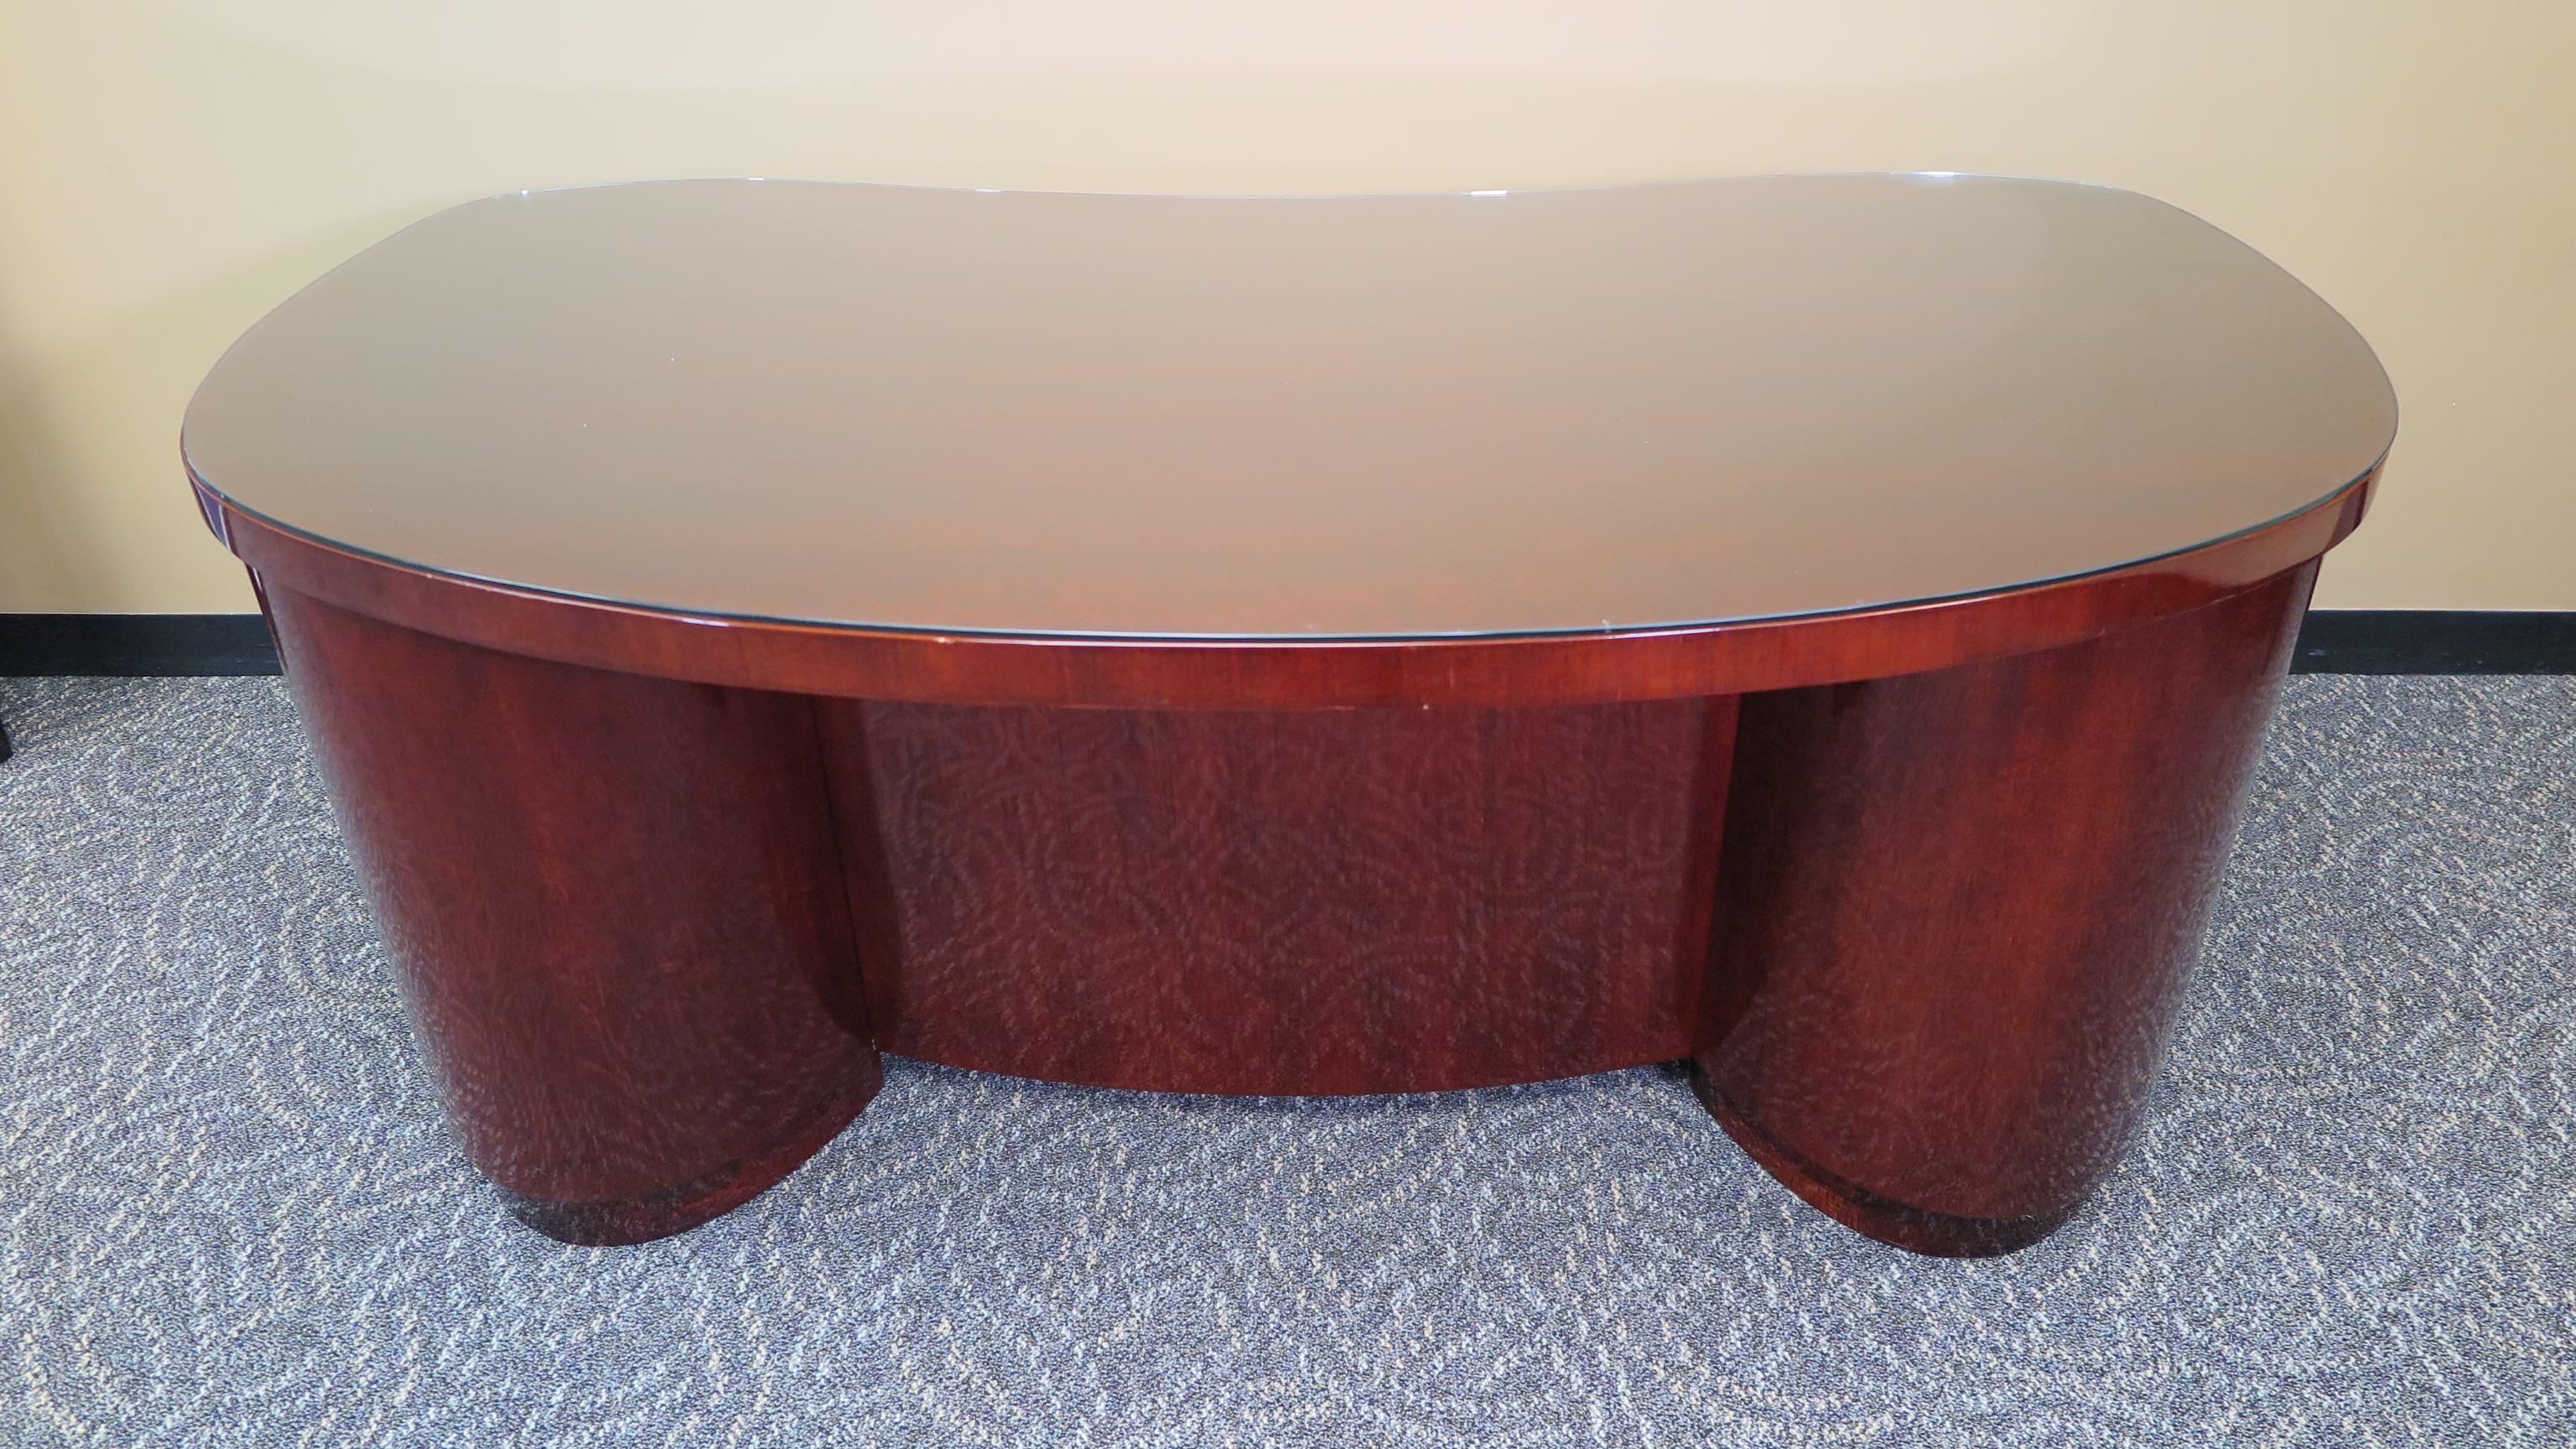 A Stow Davis desk. Art Deco kidney shaped desk by Stow Davis. Mahogany desk having four drawers with two lower file drawers. Locks working with keys. Includes a matched glass top, in excellent condition. American, 1930-1940.
This desk is in